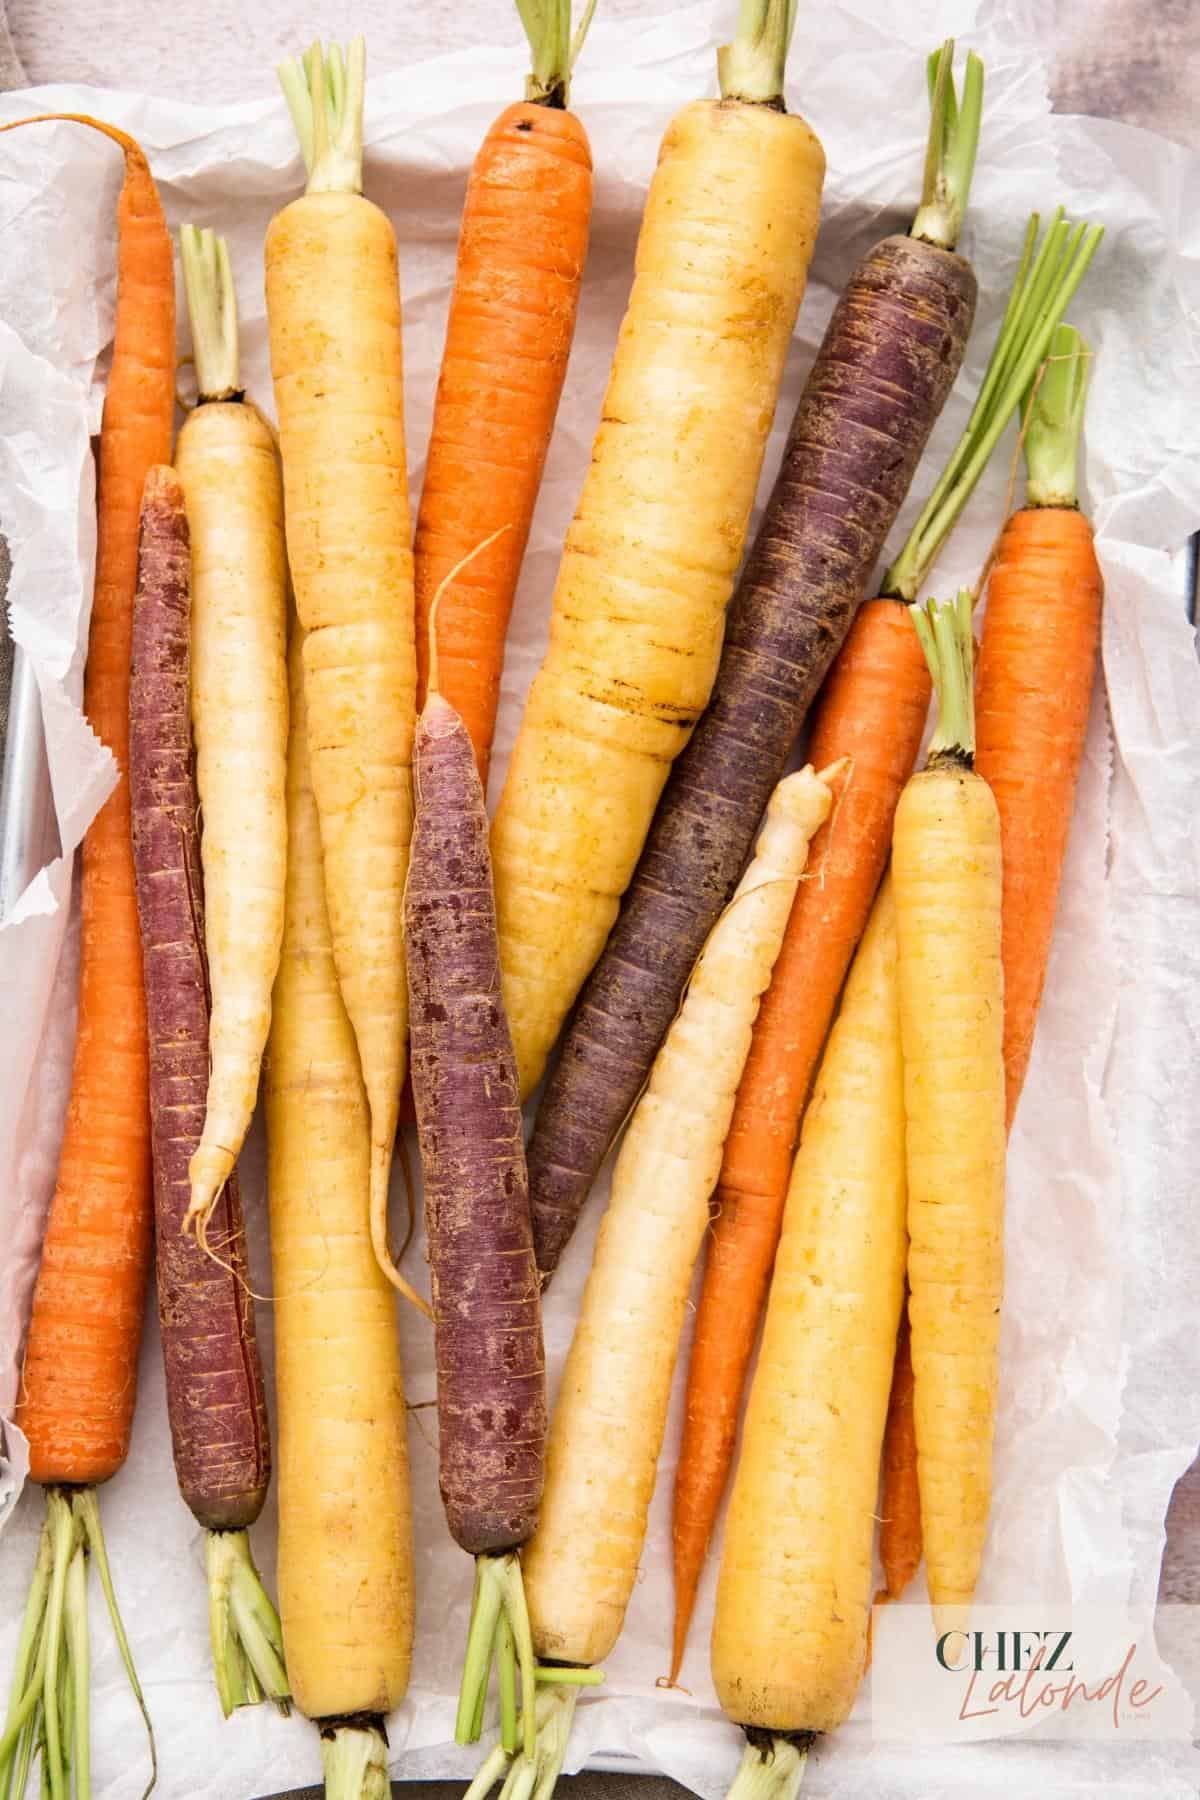 a tray of uncooked rainbow carrots.